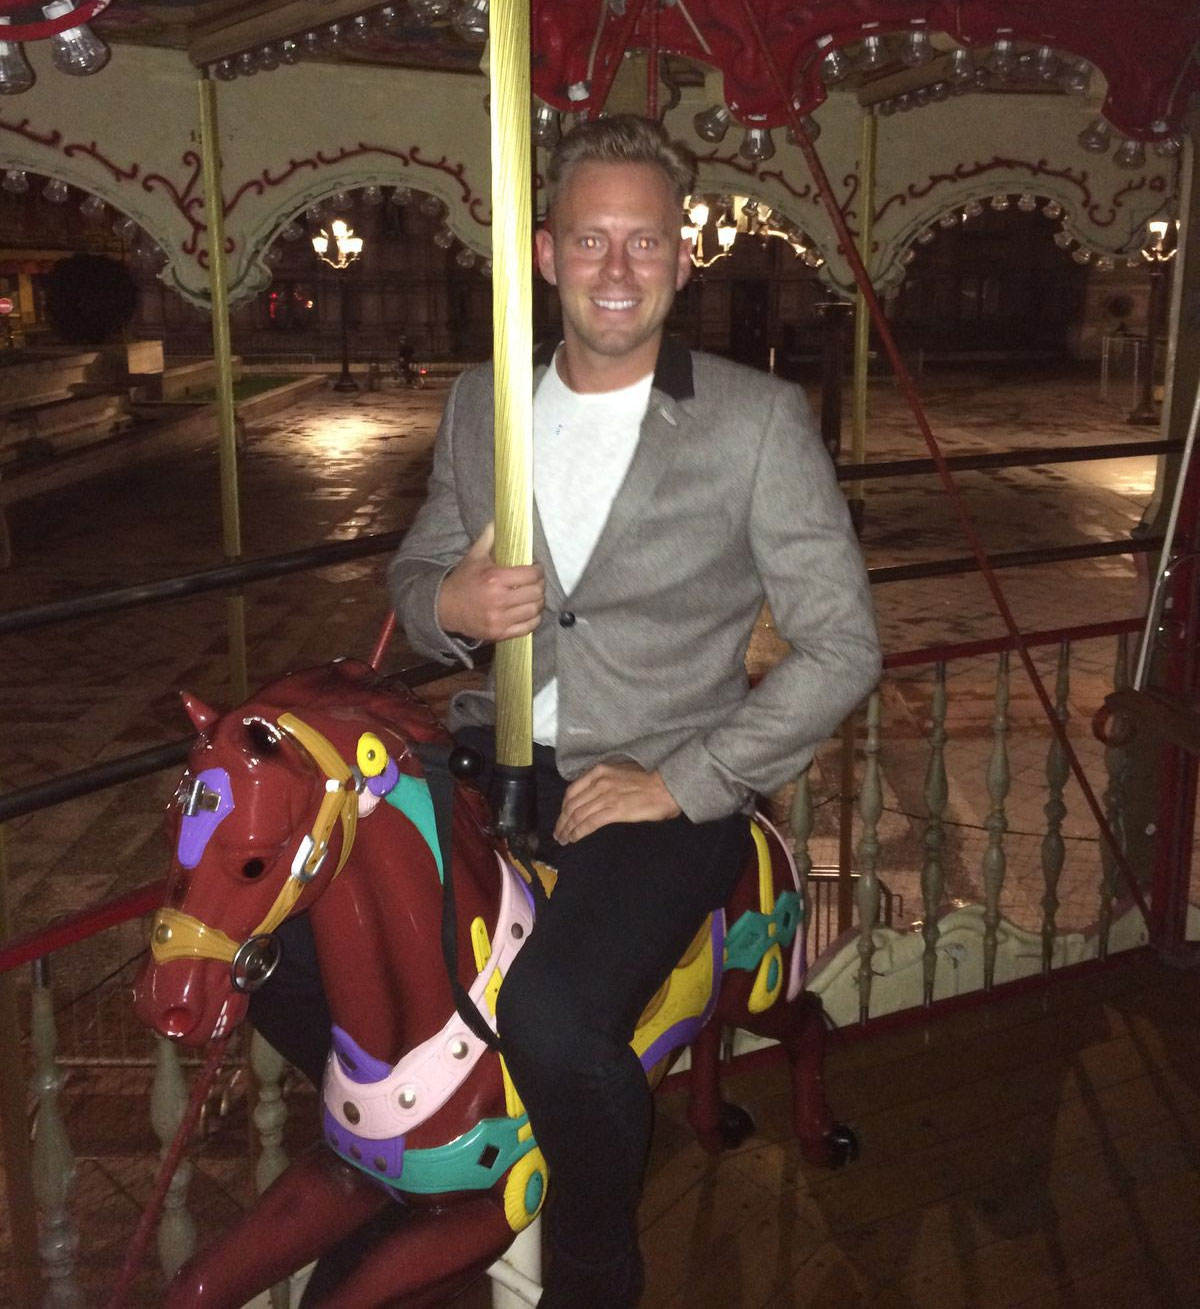 Lee on a merry go round